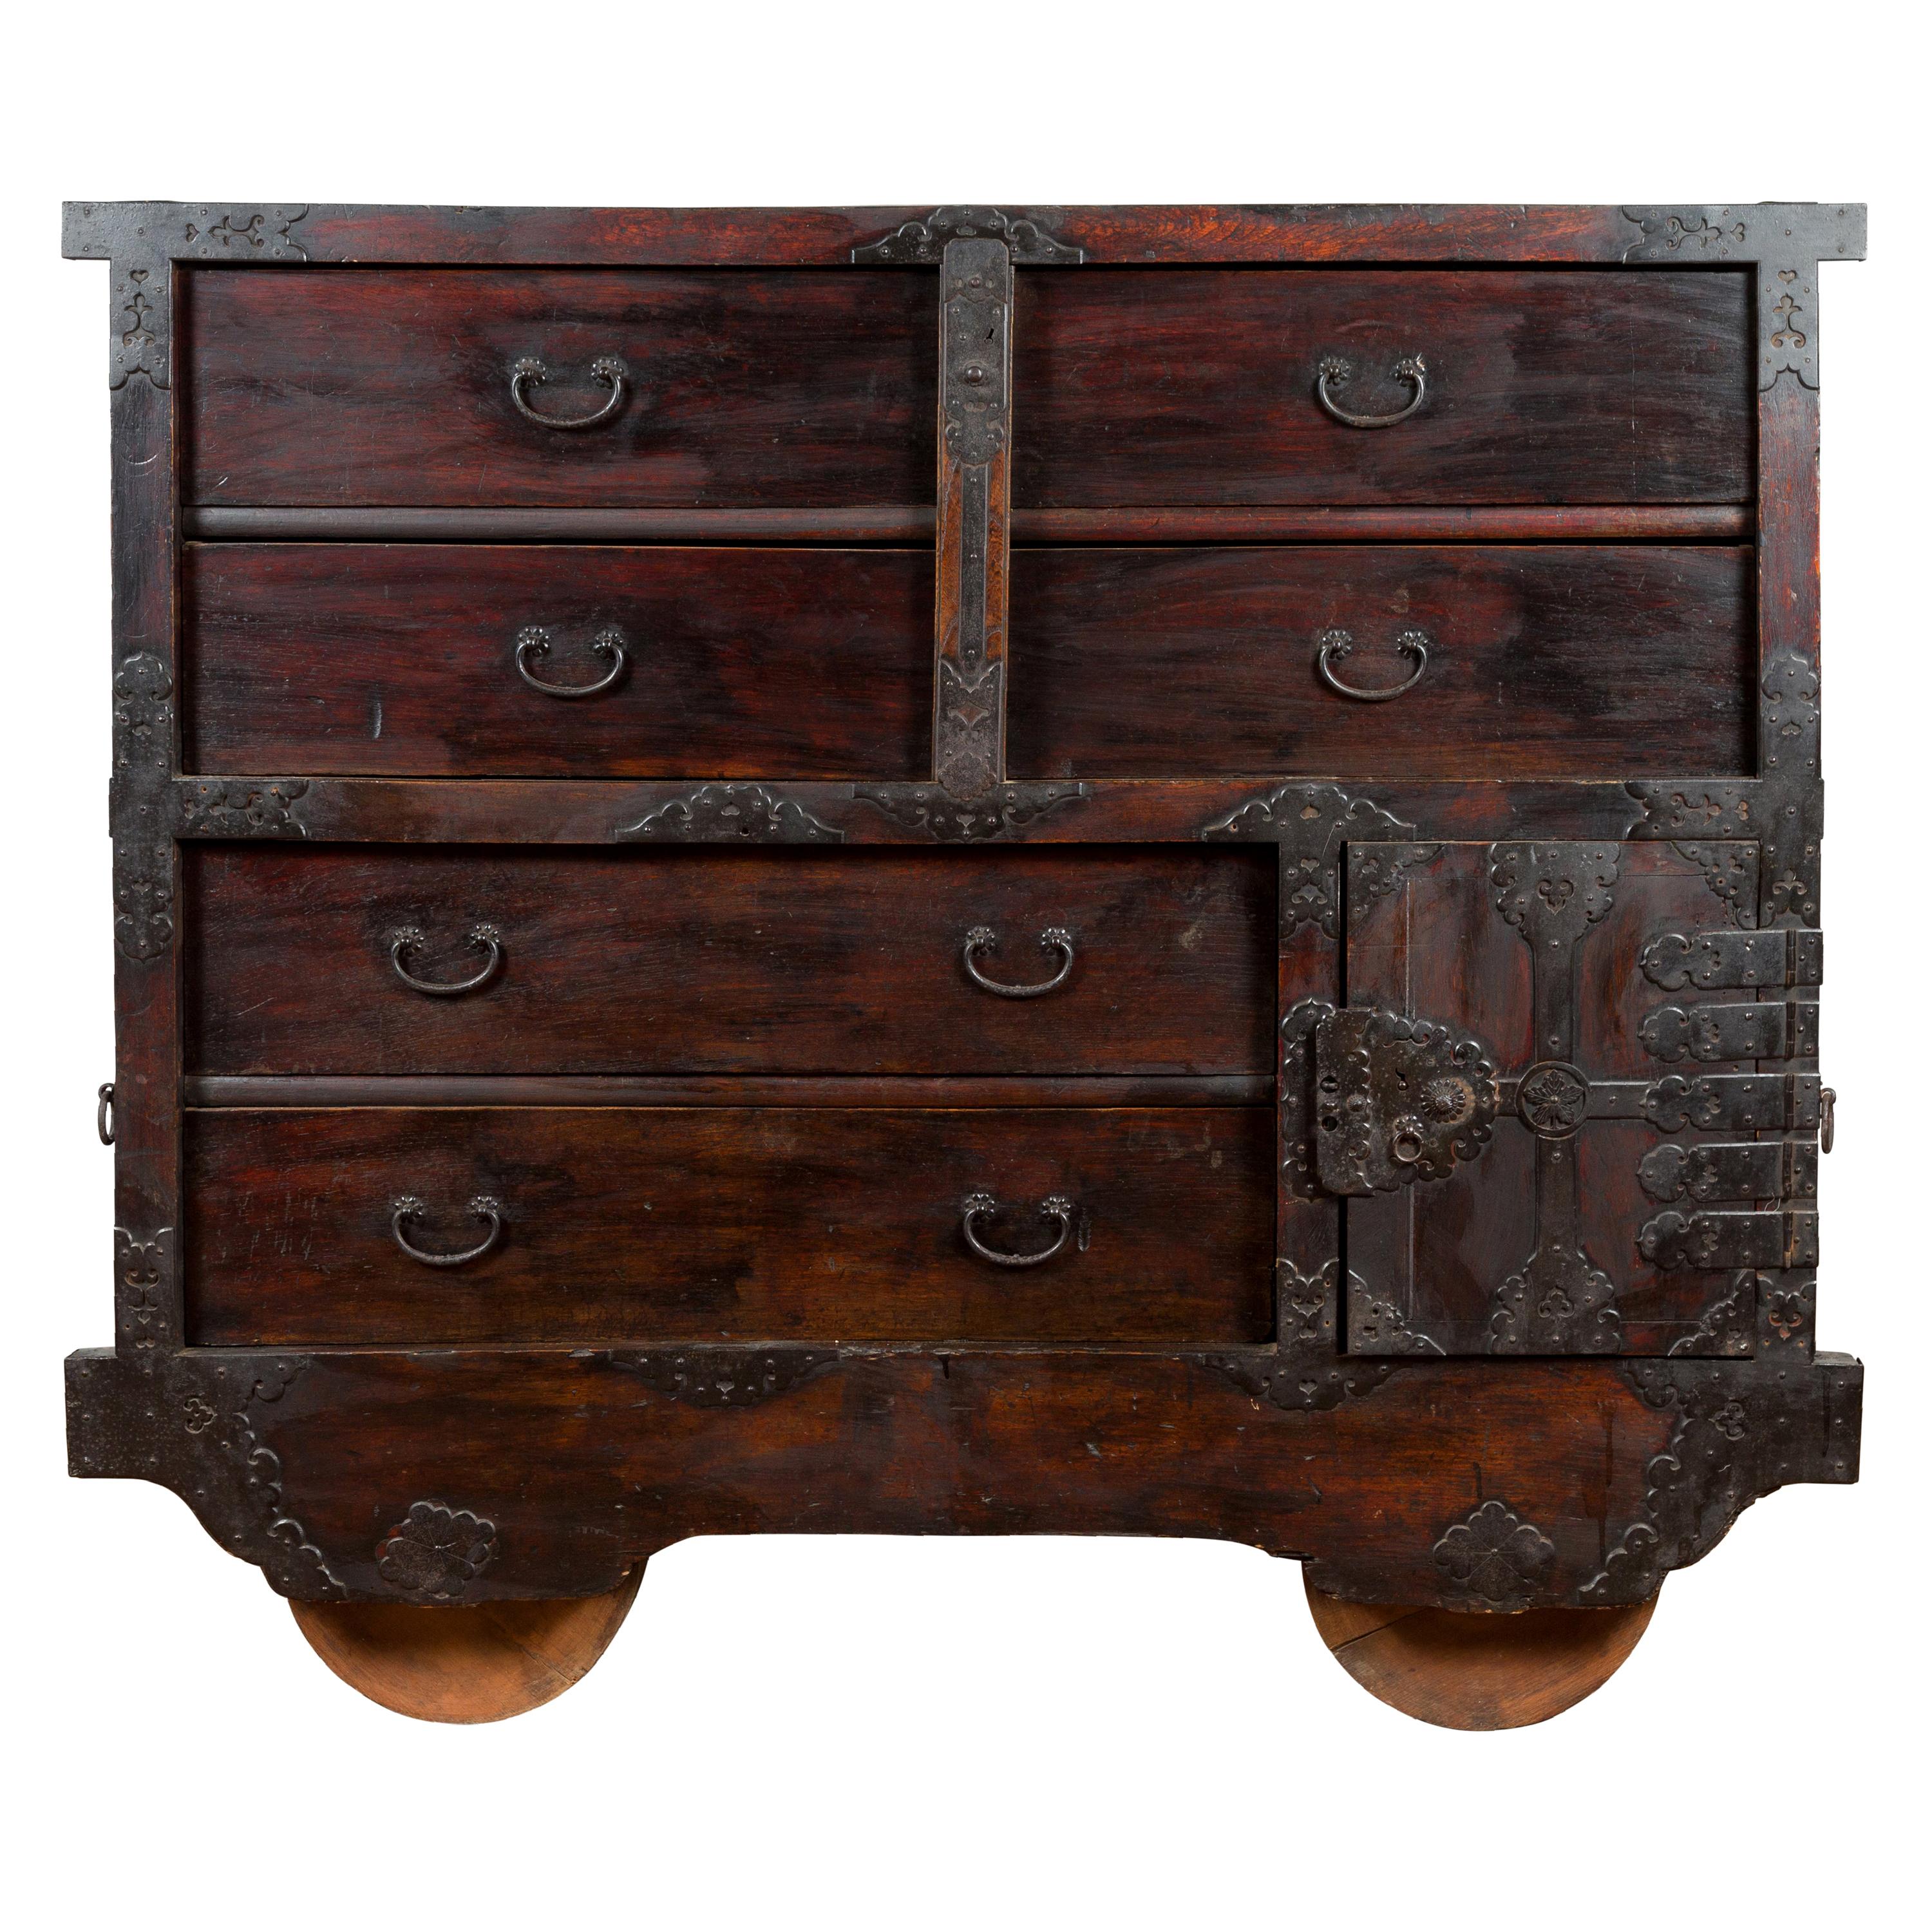 Japanese Meiji Period Late 19th Century Merchant's Chest with Safe on Wheels